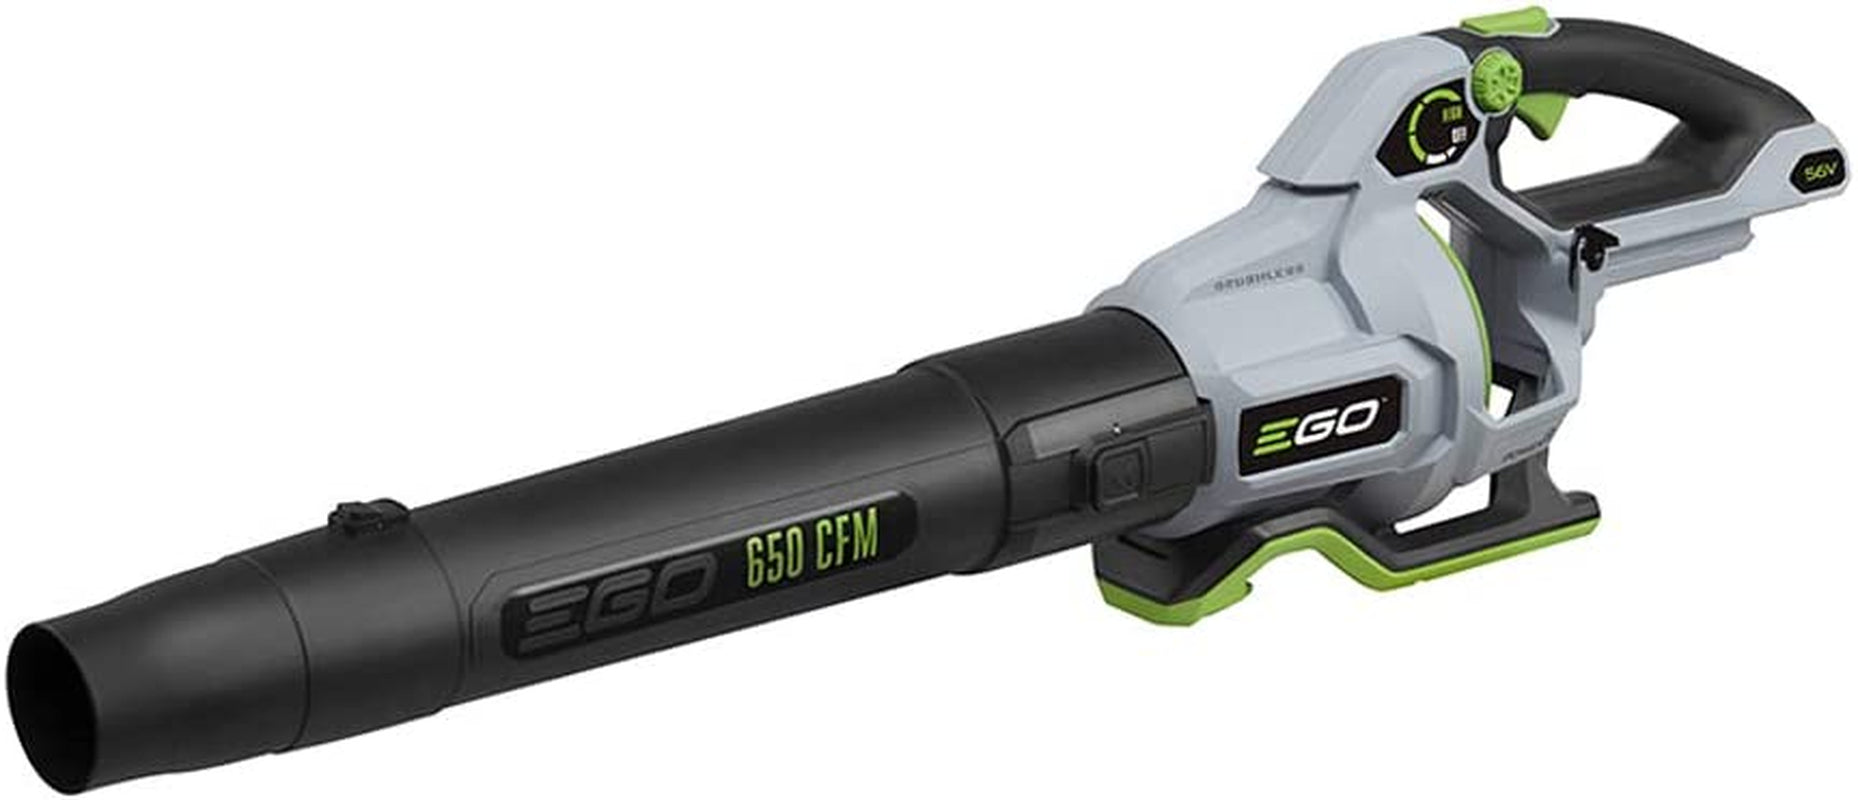 EGO Power+, EGO Power+ LB6500 650 CFM Variable-Speed 56-Volt Lithium-Ion Cordless Leaf Blower Battery and Charger Not Included